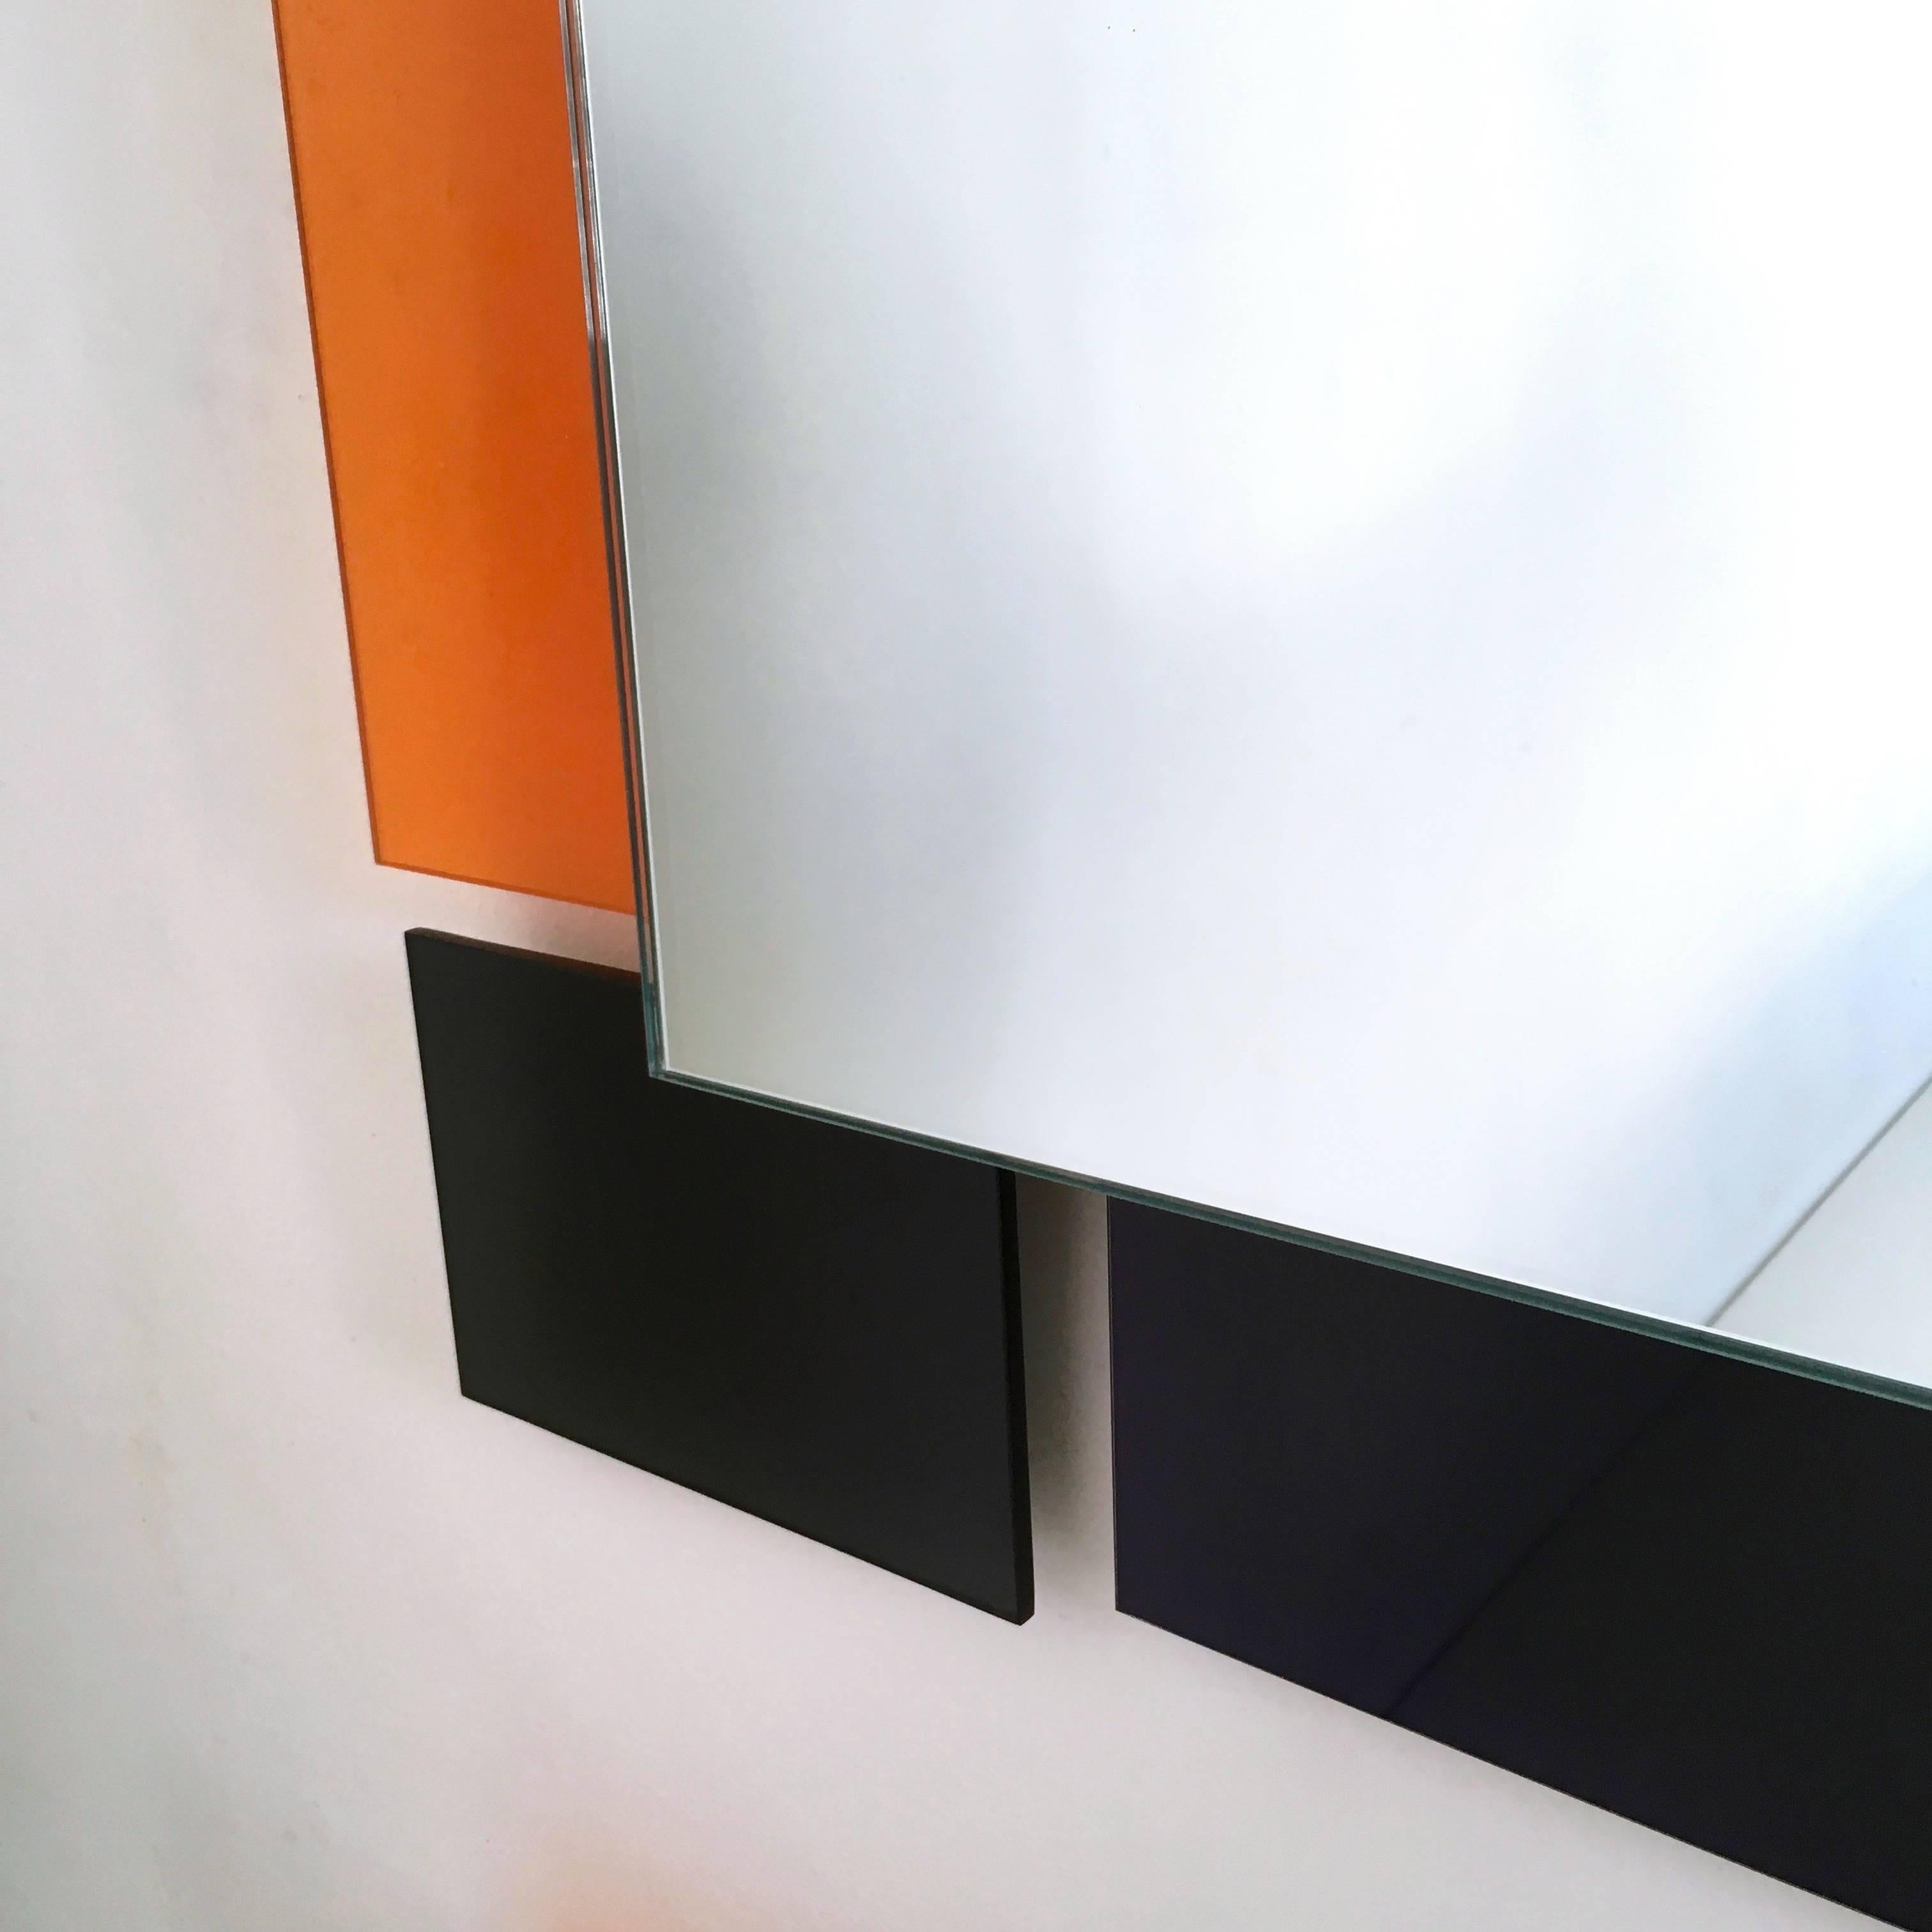 Pair of Postmodern Black and Orange Wall Mirrors in the Style of Sottsass, 1980s For Sale 5